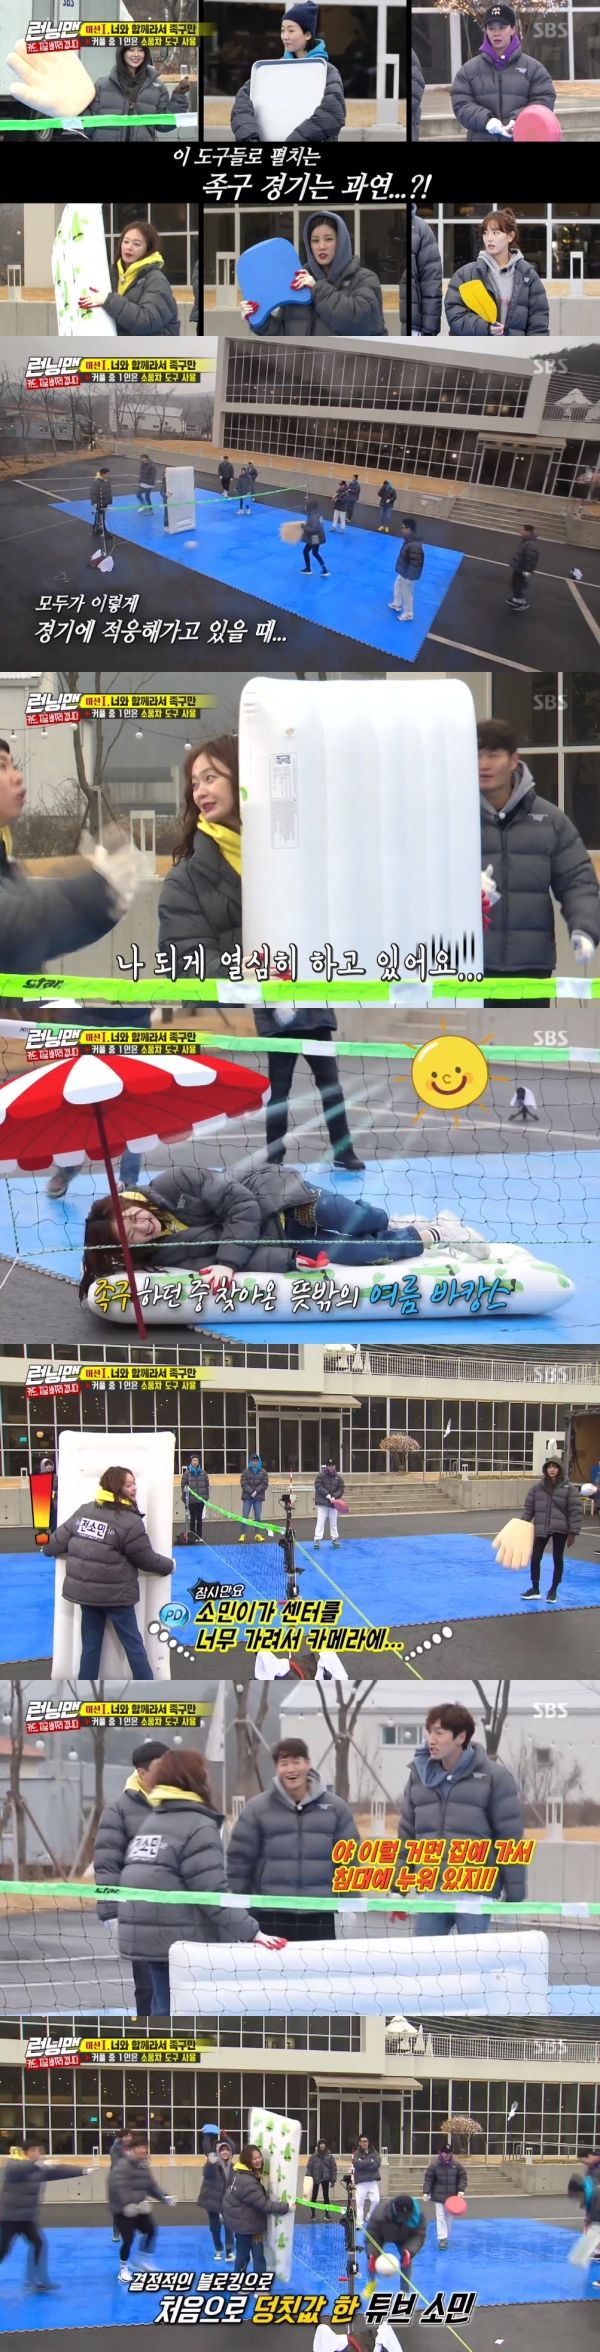 Members were left laughing at Jokgu Kyonggi of Jeon So-minOn SBS Running Man broadcasted on the 19th, members, guest Kang Han-Na, Kim Sang-rok, Park Cho-rong and Lee Ju-young played Jokgu.Prior to the Jokgu match, Kang Han-Na used No, Kangson model, and Park Cho-rong Kippan as tools.Jeon So-min laughed at the members by Choices Air France TubeThe fast-forward hit the ball with a hand model, and Ji Suk-jin looked at the tool and added, Serok is an ace. Kang Han-Na used a paddle to lift the ball.Im doing it, this is a stop dragon, explained Jeon So-min, holding a sizeable Air France Tube.Sommin does not even have a face, said Yoo Jae-Suk, who watched. Sommin has come on vacation.So, Jeon So-min lay on Tube, and Haha resumed the Jokgu match, saying, I can see the front now.However, the production team also said, Somin is too blind to the center, on the camera, and Jeon So-min and Tube were pushed back and laughed.In the resuming Jokgu match, Yoo Jae-Suk, who was avoiding the ball, showed a mask dance; Haha followed it, saying it was Bongsan mask dance.Yoo Jae-Suk then walked out with a shoulder dance, and Lee Kwang-soo laughed, saying, I used my shoulder once and was kicked out.Kang Han-Na, who had a row in the subsequent Kyonggi, showed a strong spike, and Jeon So-min, who joined again, succeeded in blocking with Tube and led the victory.Meanwhile, during the mission to avoid water balloons, Kang Han-Na was seen as a water balloon collector; after the mission ended, Kang Han-Na was a lot hit with a soaking look.I thought someone was hitting the back with a river punch. 